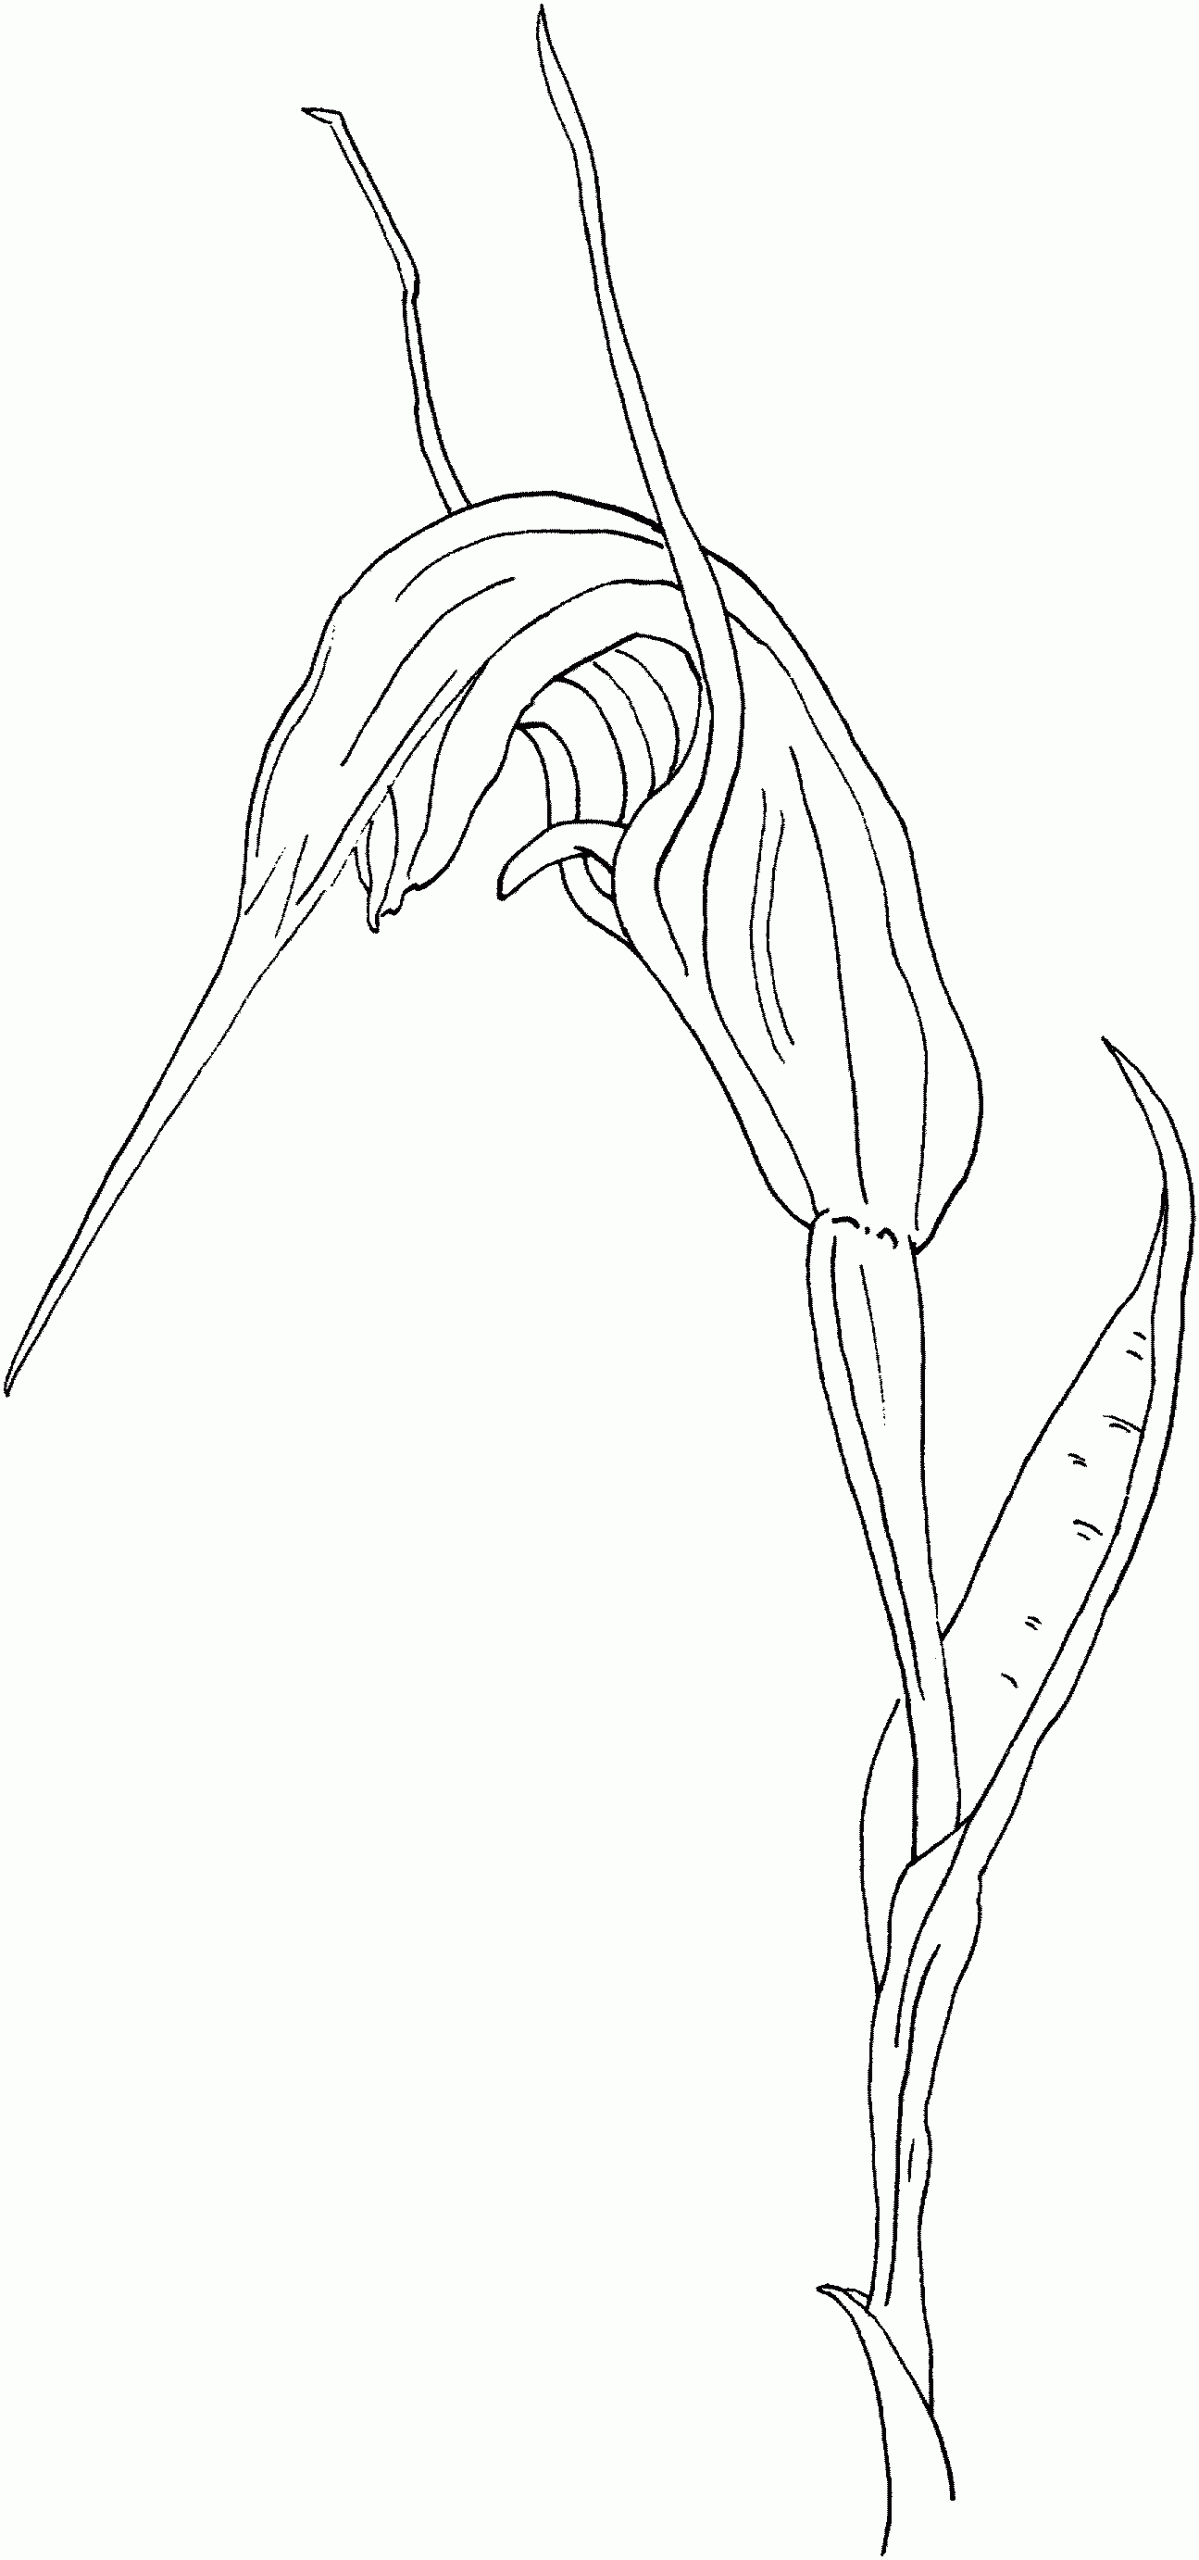 Gummer Greenhood Orchid Coloring Page